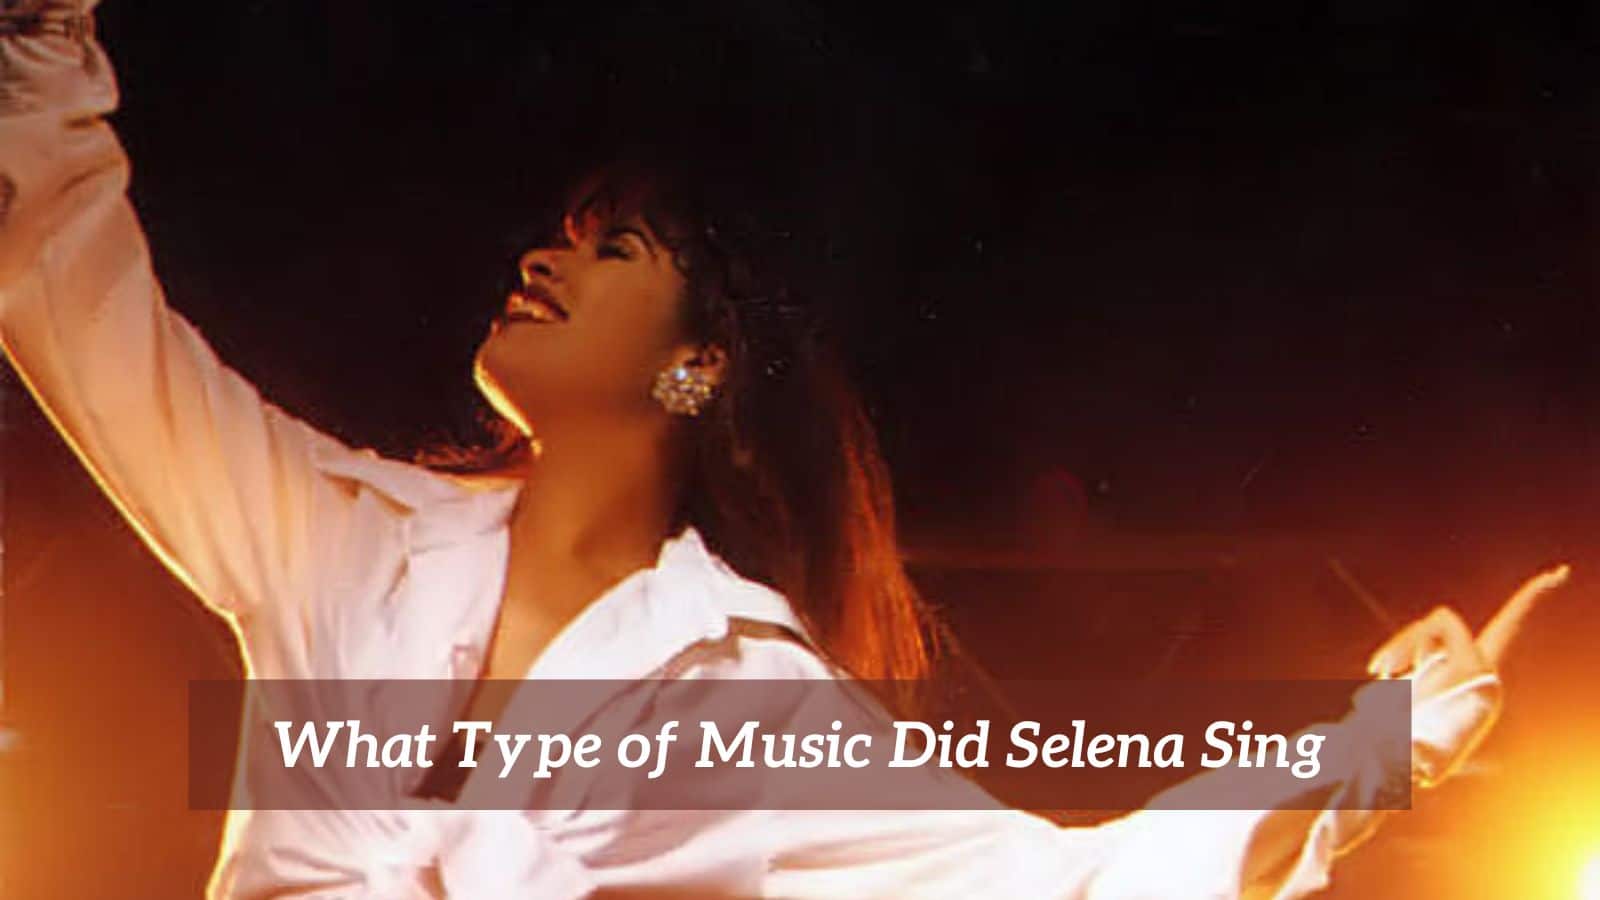 What Type of Music Did Selena Sing